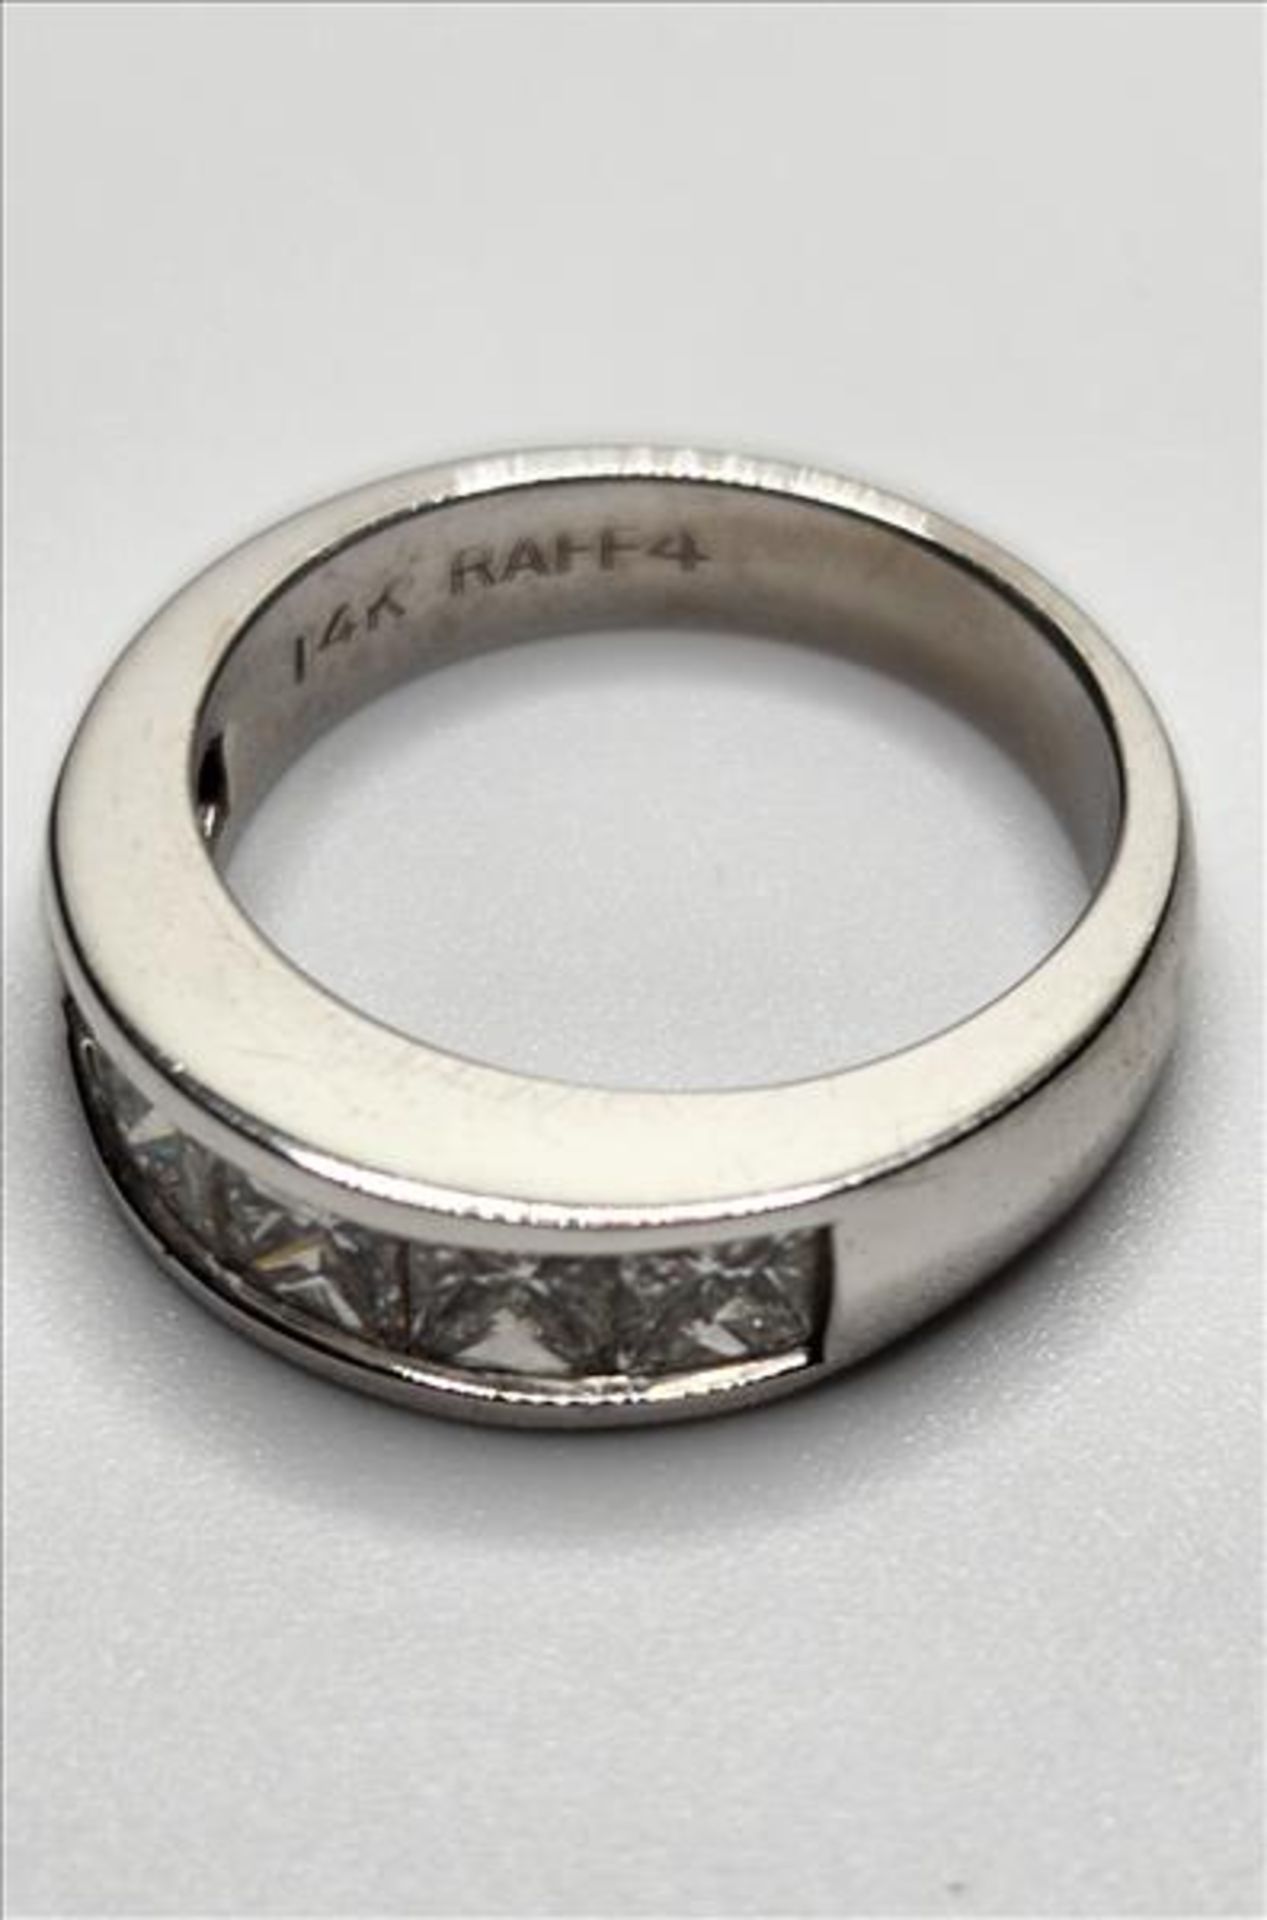 One lady’s stamped and tested 14kt white gold (Raff-4) diamond band shaped ring. Channel set